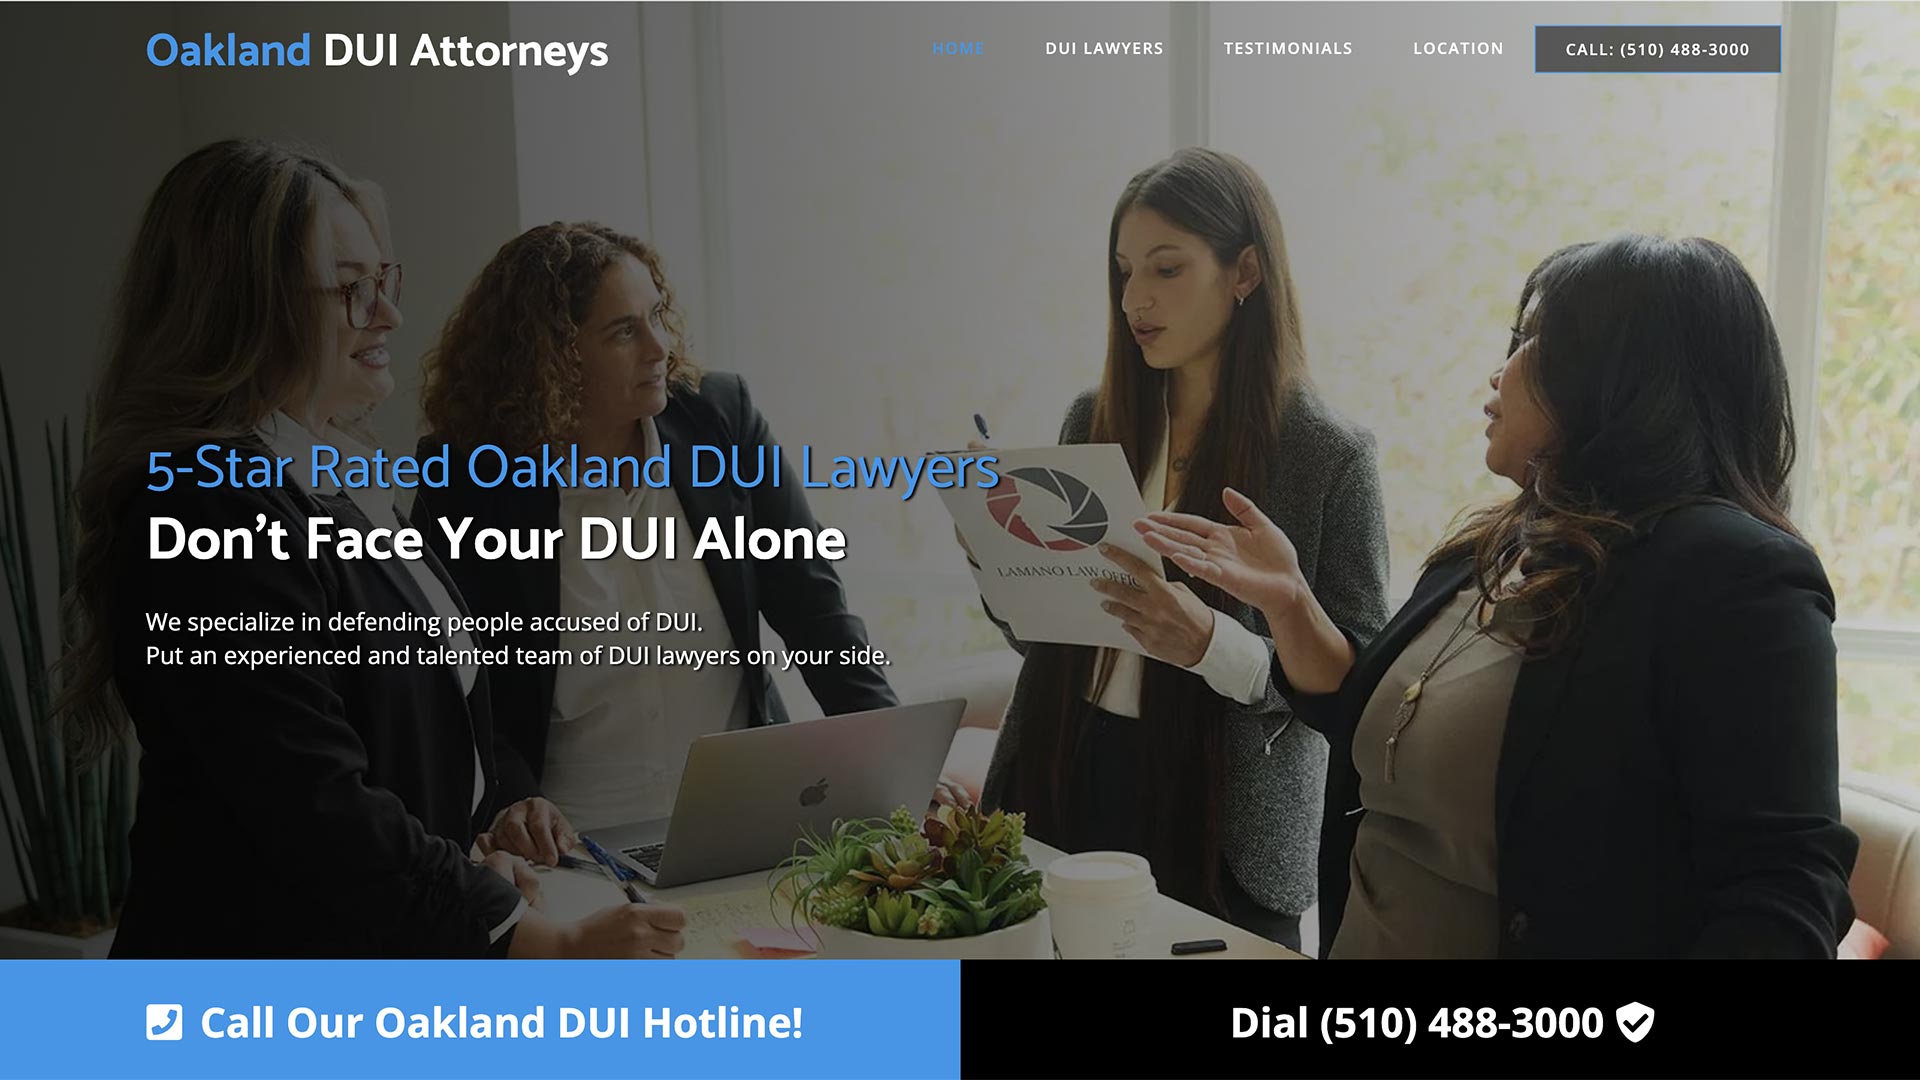 Law Firm Landing Page Design Example: Oakland DUI Attorney Website